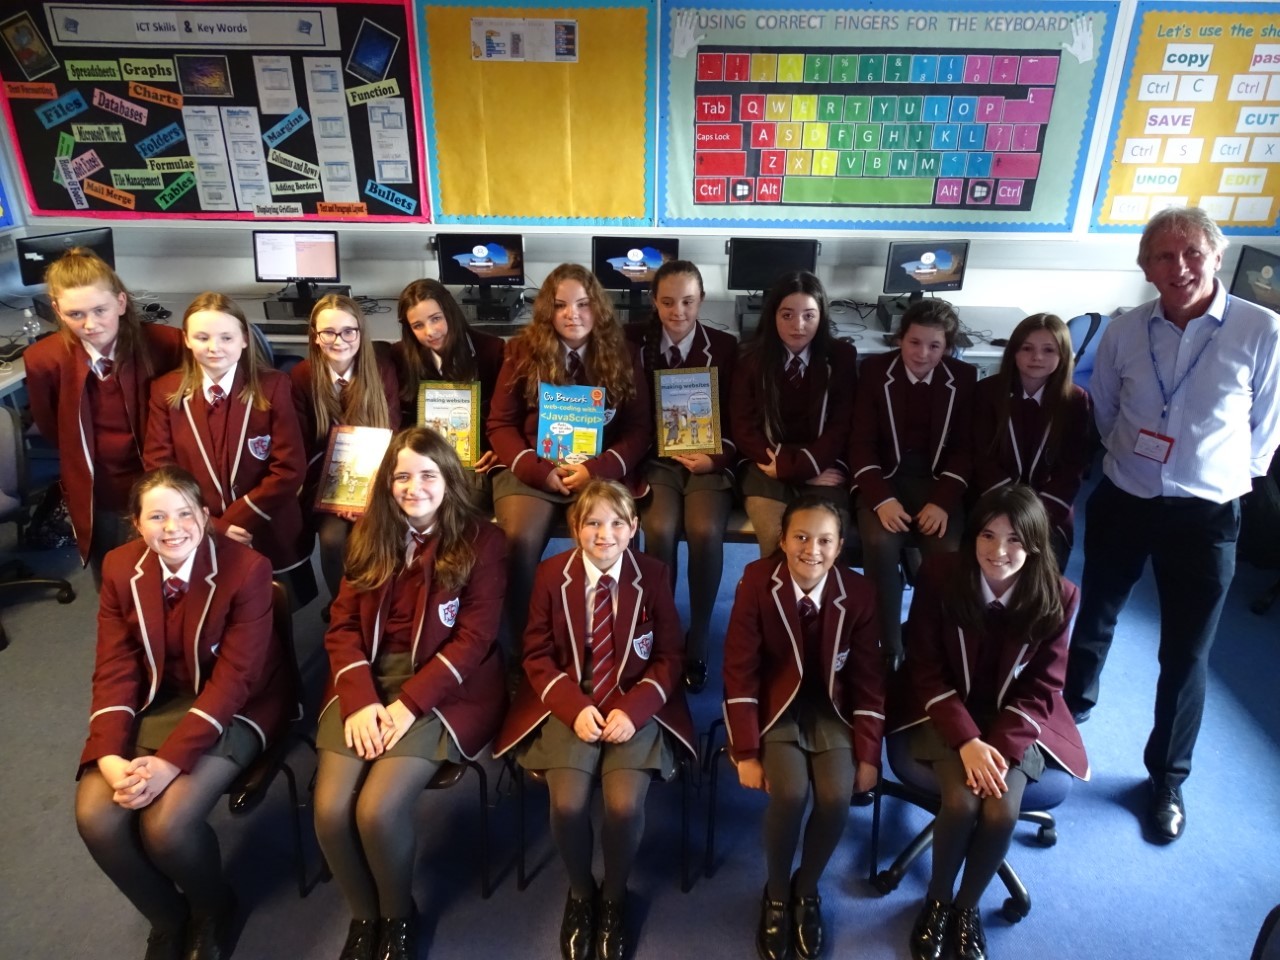 St. Fancheas College students pictured with Ian Simons from Go Berserk. Back Row (L-R) Maisie Bogue, Nessa Ferguson, Eimear Lavelle, Saoirse Sliman, Aoibheann McCarney, Lacey Maughan, Mary-Kate Ward, Cora Traynor and Kayla Houston. Front Row (L-R)